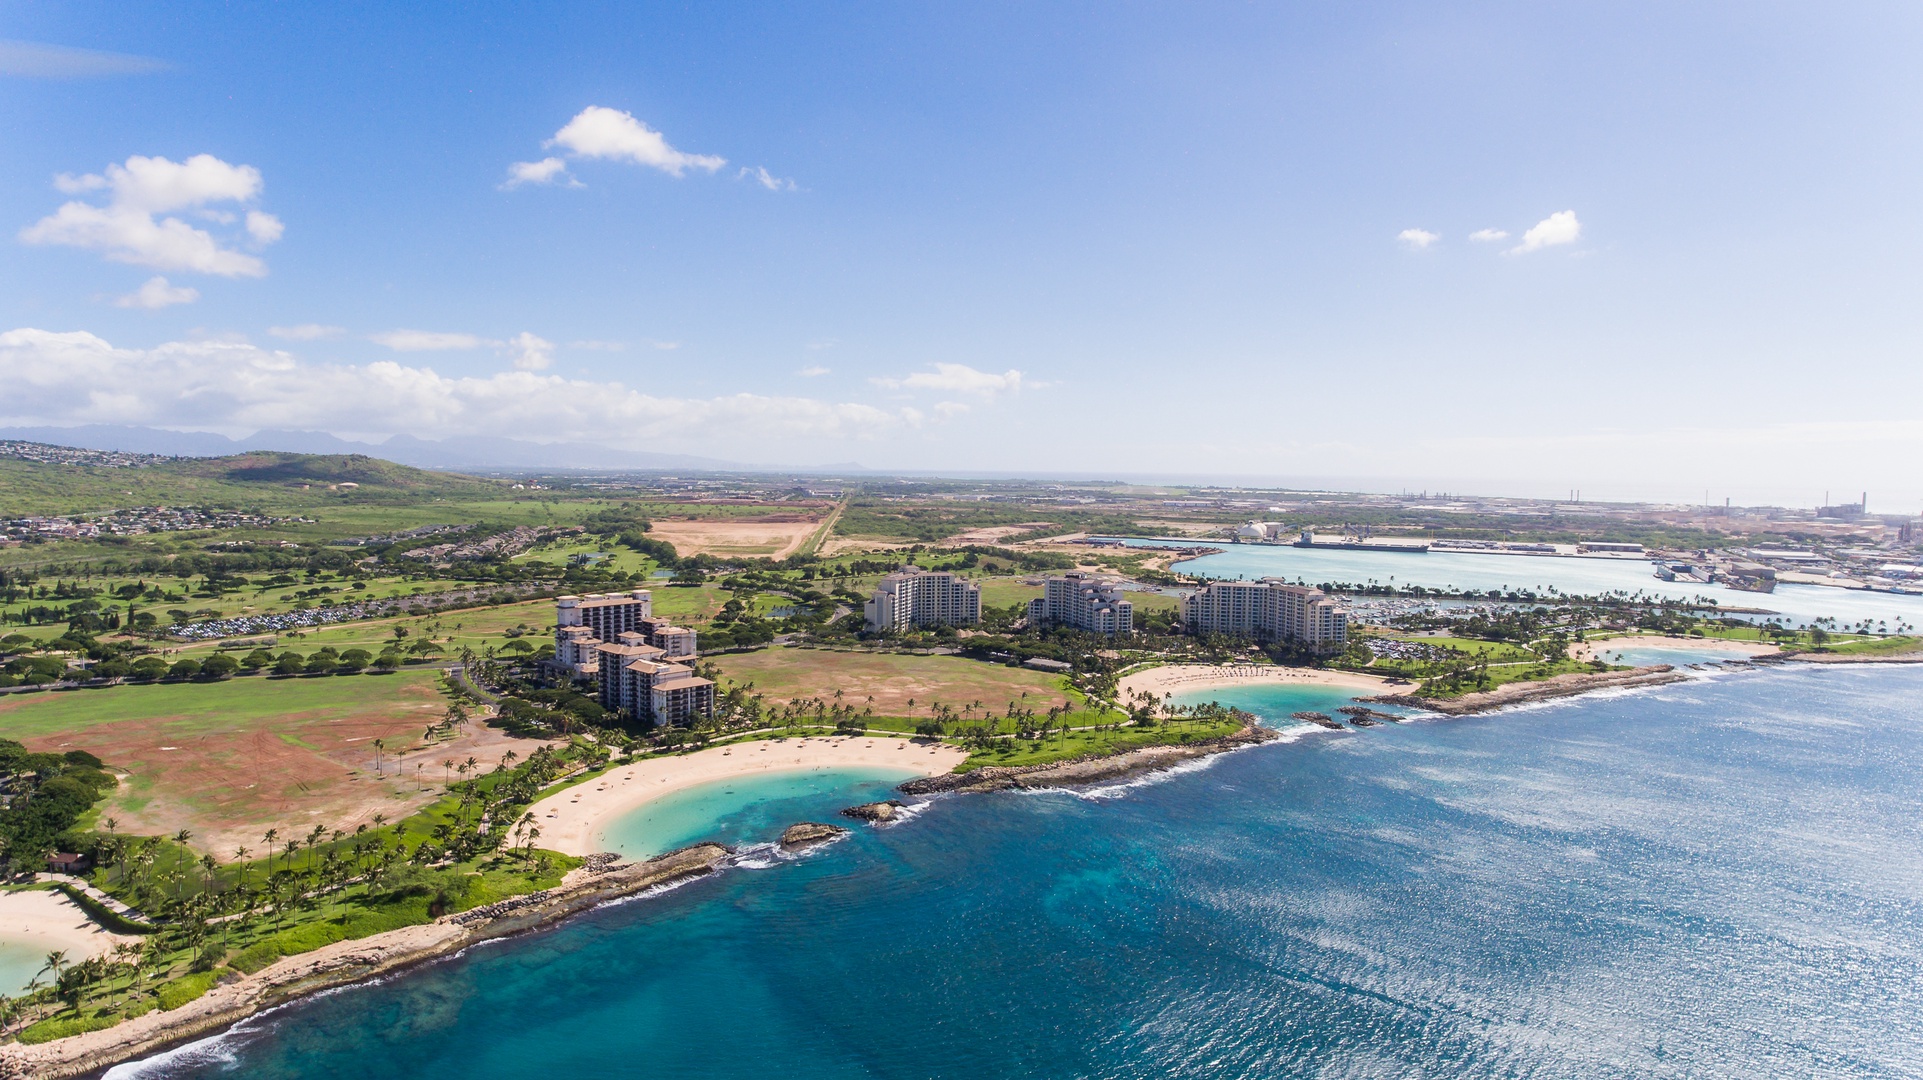 Kapolei Vacation Rentals, Coconut Plantation 1222-3 - An aerial view of the tropical lagoons on the island.